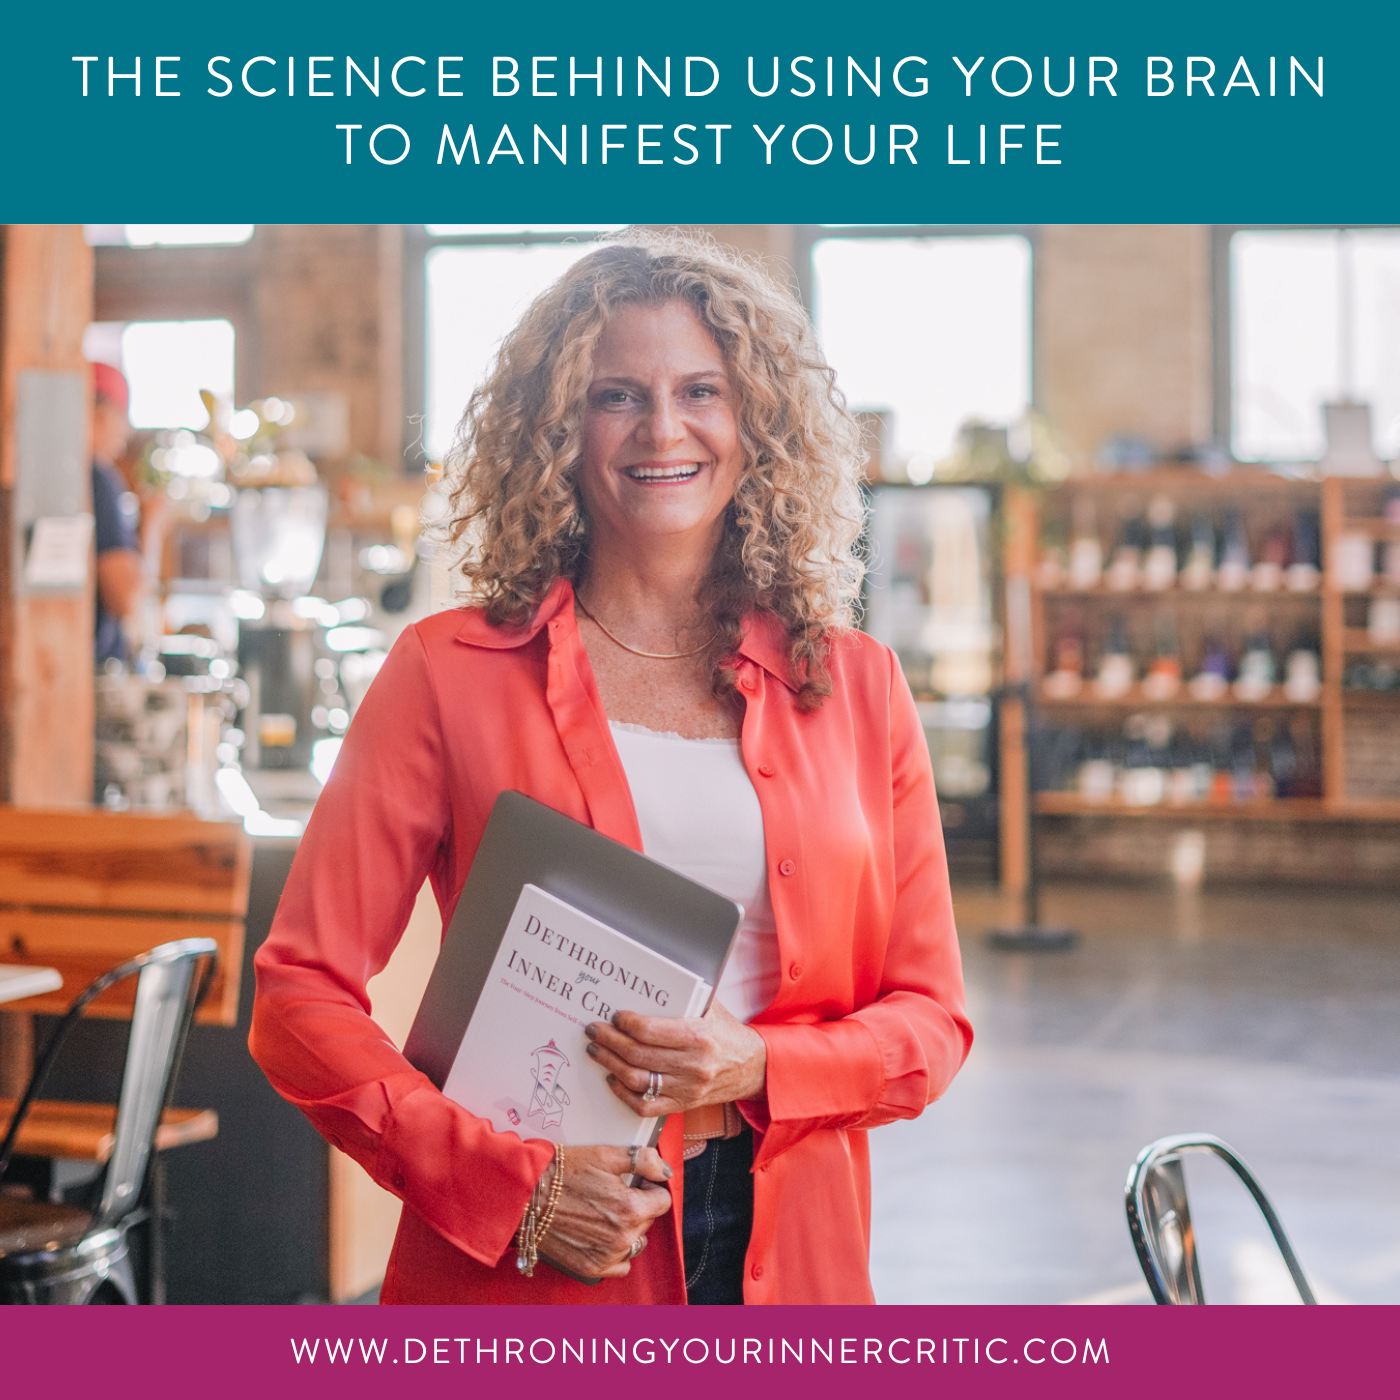 The Science Behind Using Your Brain to Manifest Your Life